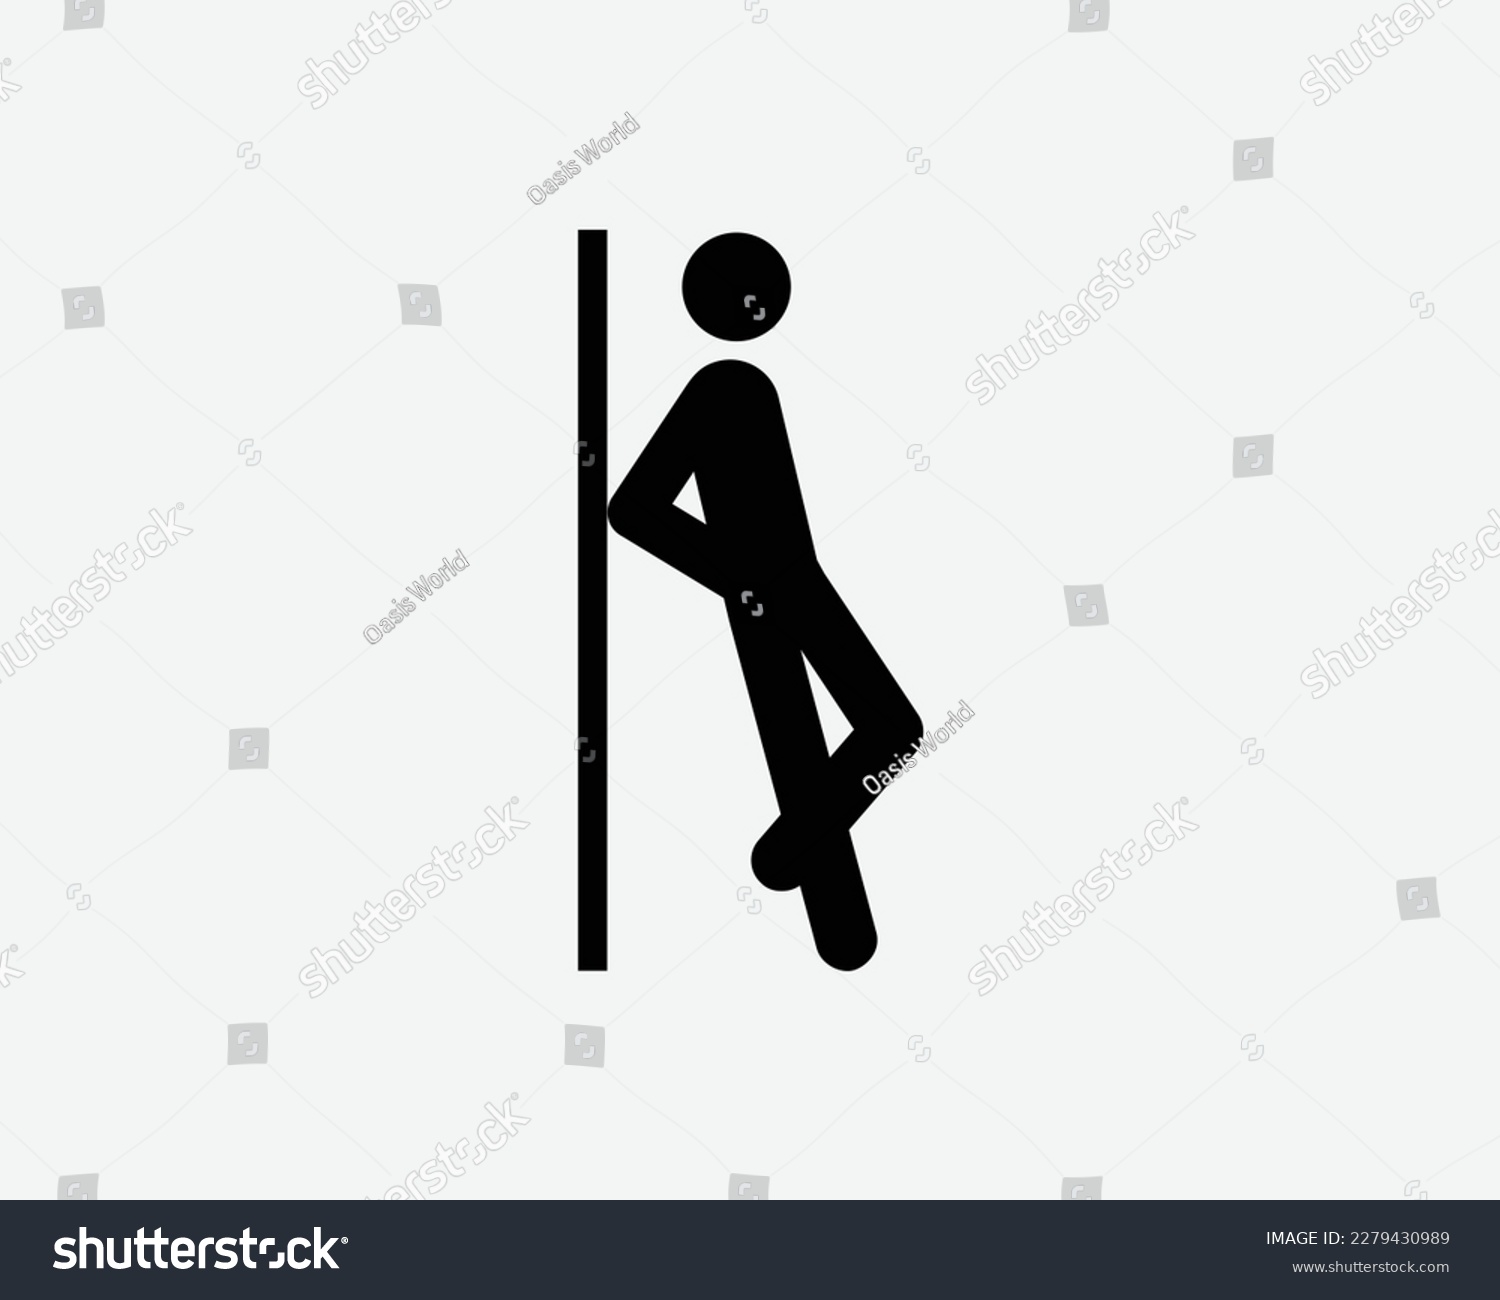 SVG of Man Leaning Against Wall Icon Tired Rest Resting Lean Stick Figure Vector Black White Silhouette Symbol Sign Graphic Clipart Artwork Illustration Pictogram svg